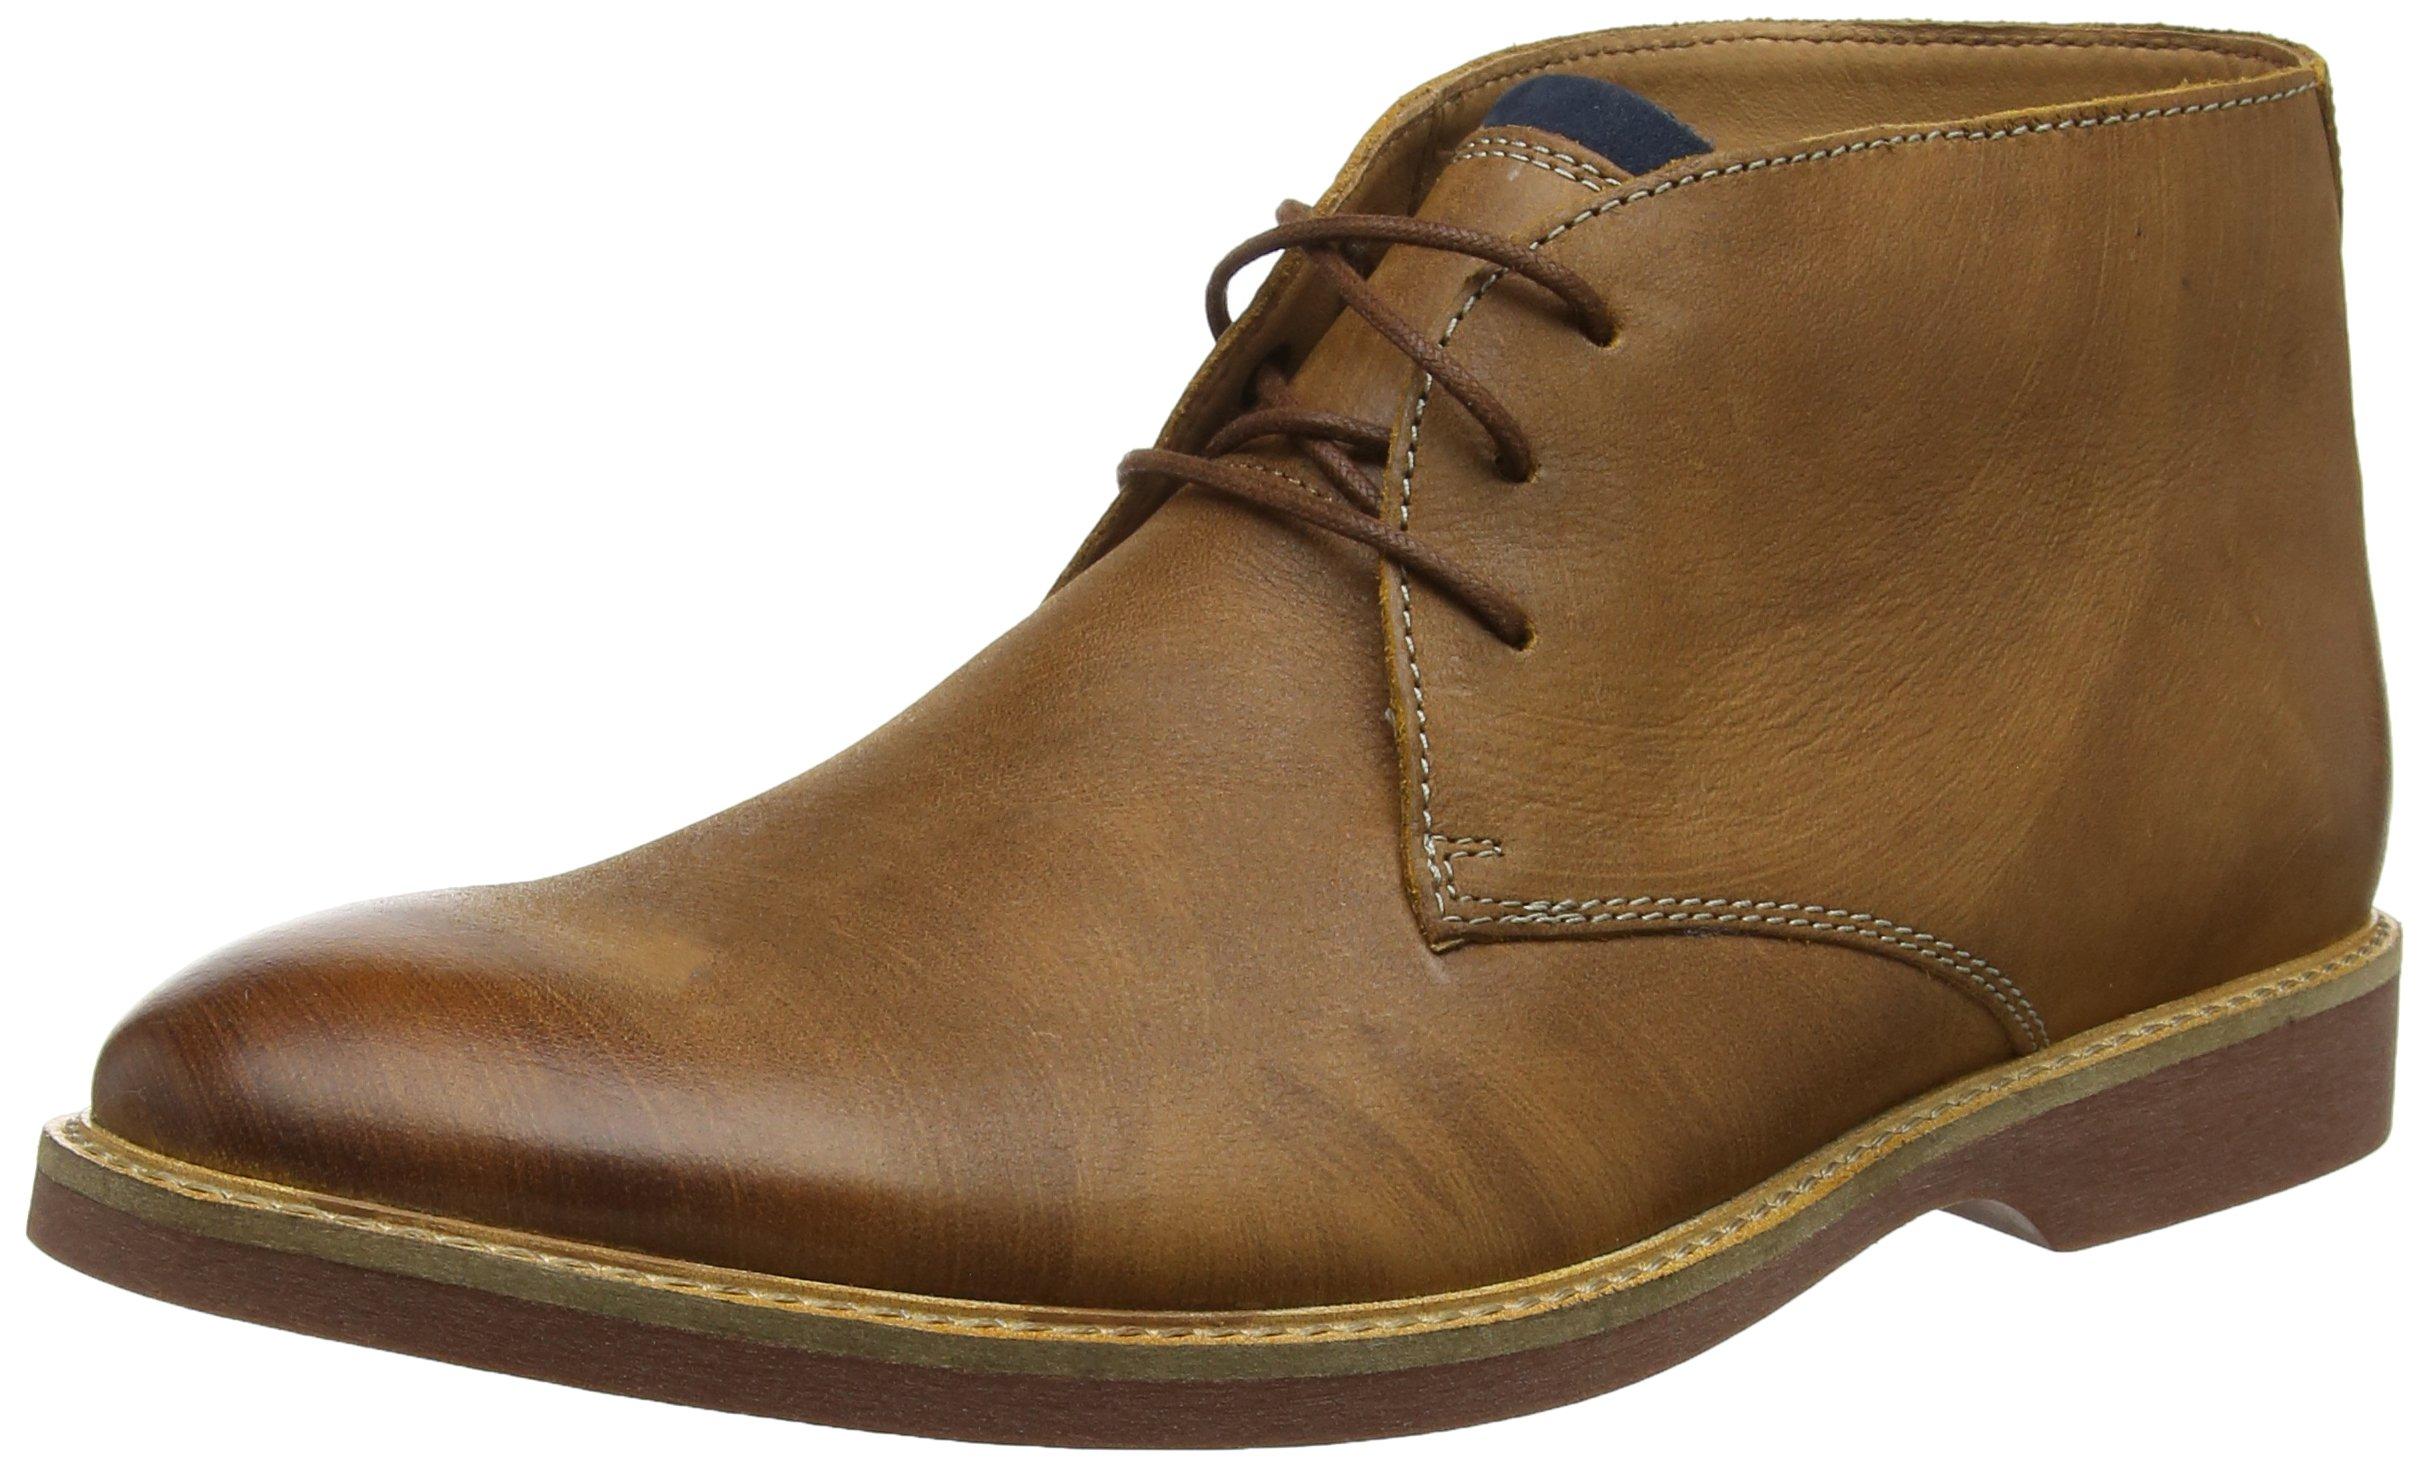 Mens Clarks Casual Ankle Boots 'Atticus Limit'